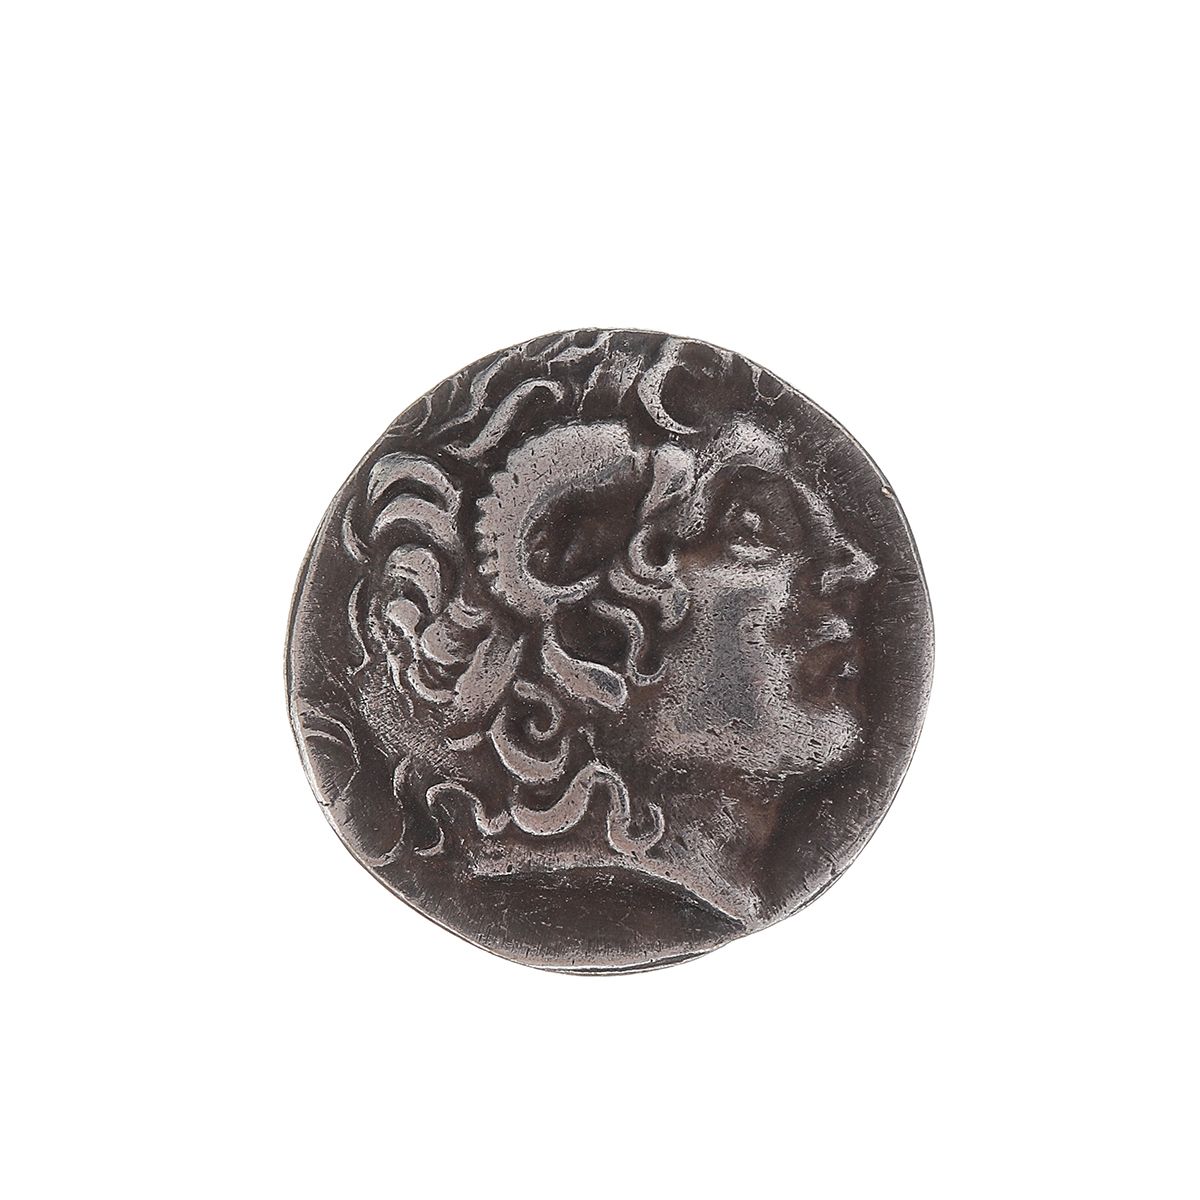 336-323-BC-Silver-Plated-Drachm-Rare-Ancient-Alexander-III-The-Great-Greek-Coins-Decorations-1541340